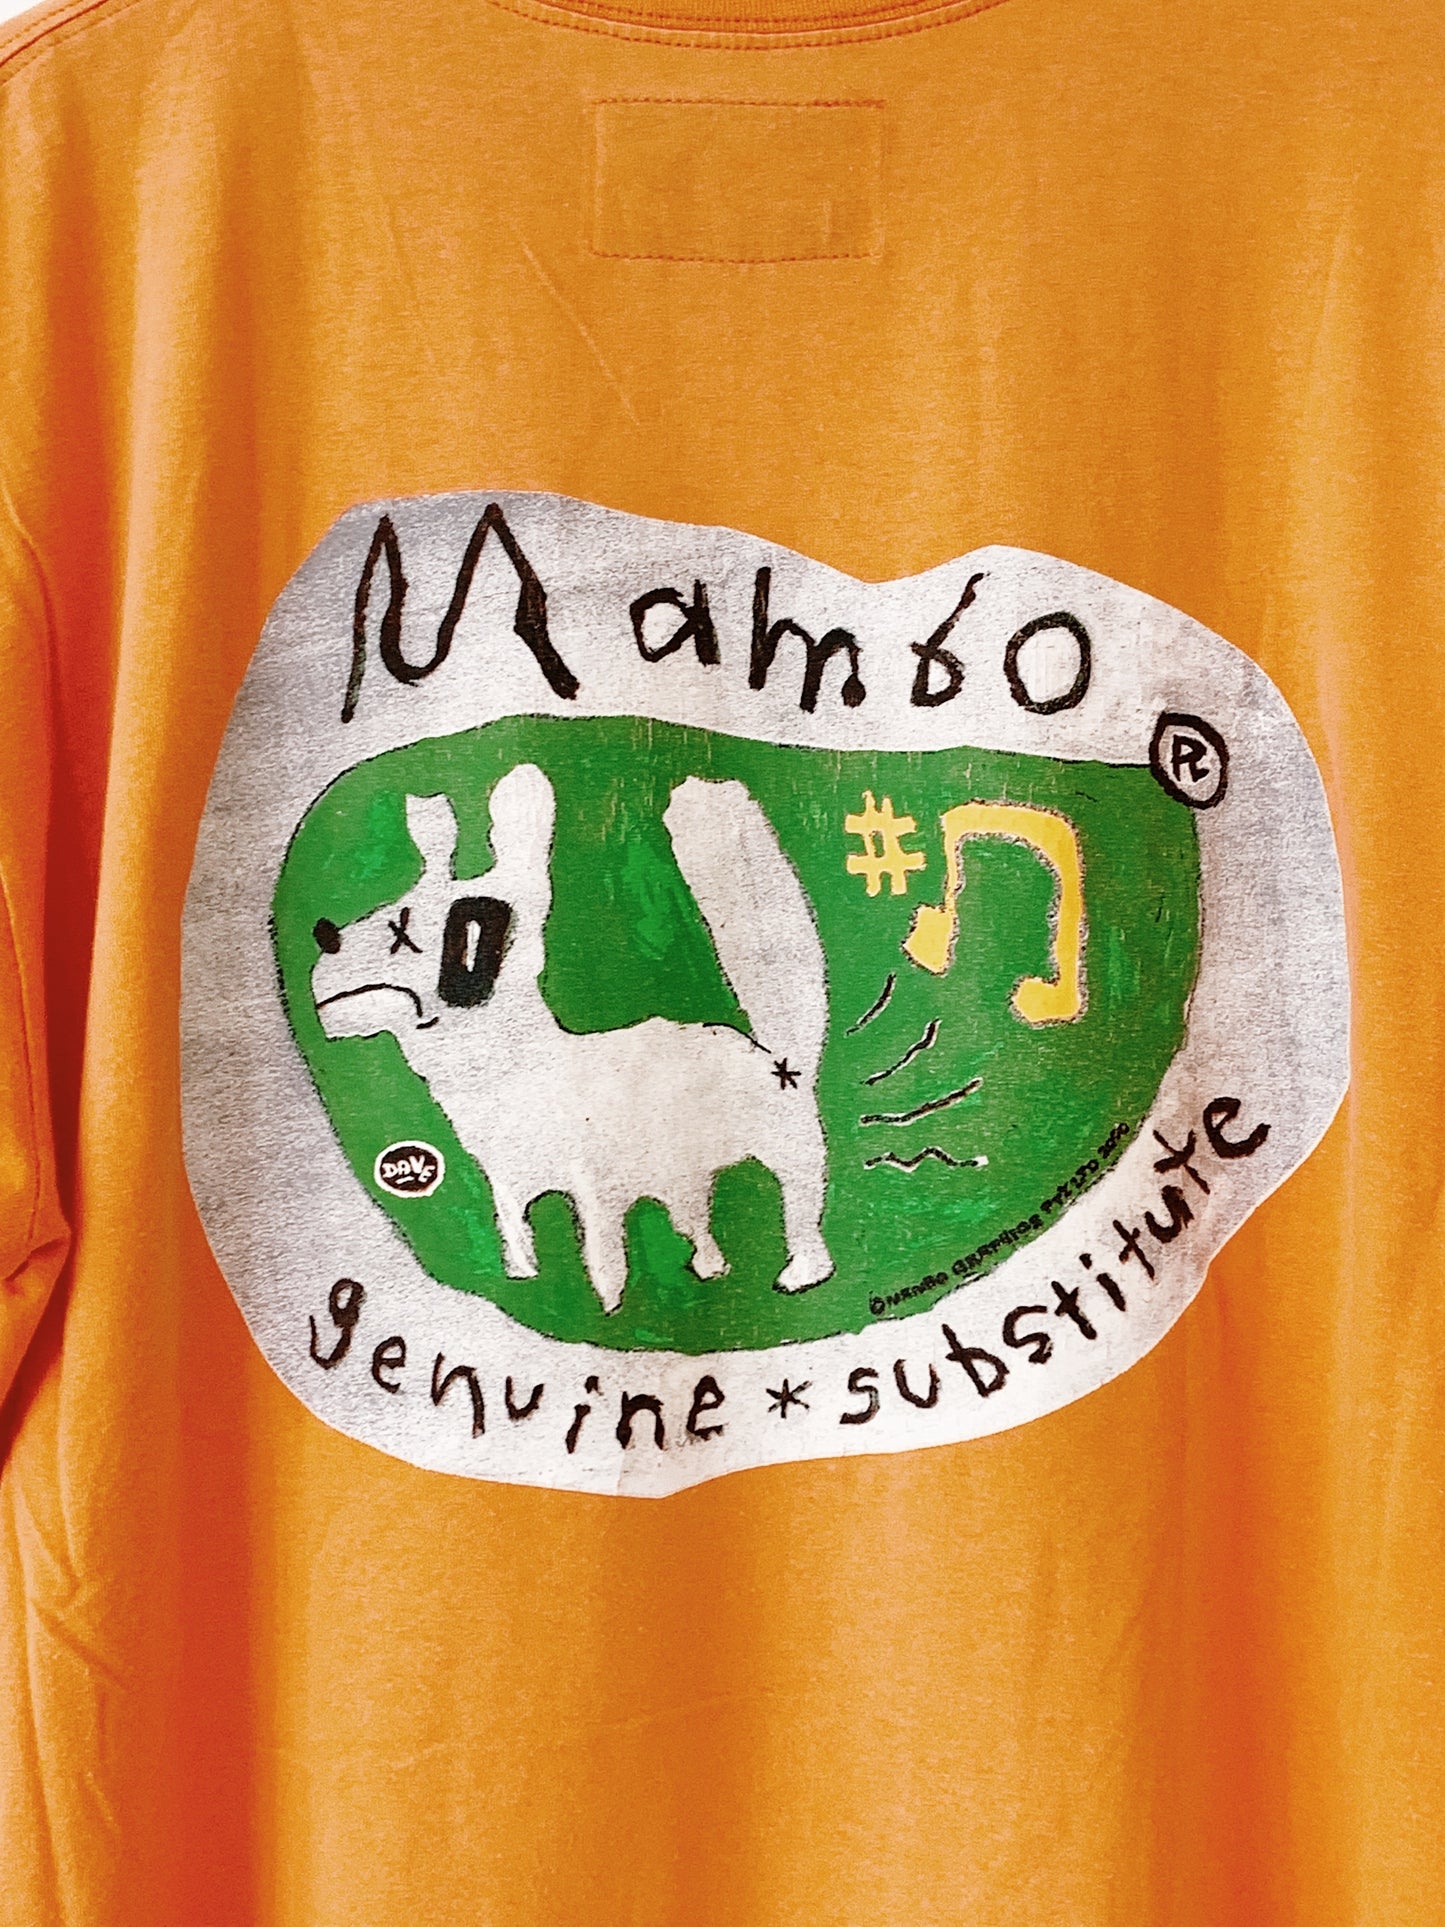 Vintage Dave McKay for Mambo "Genuine Substitute" '00 T-Shirt